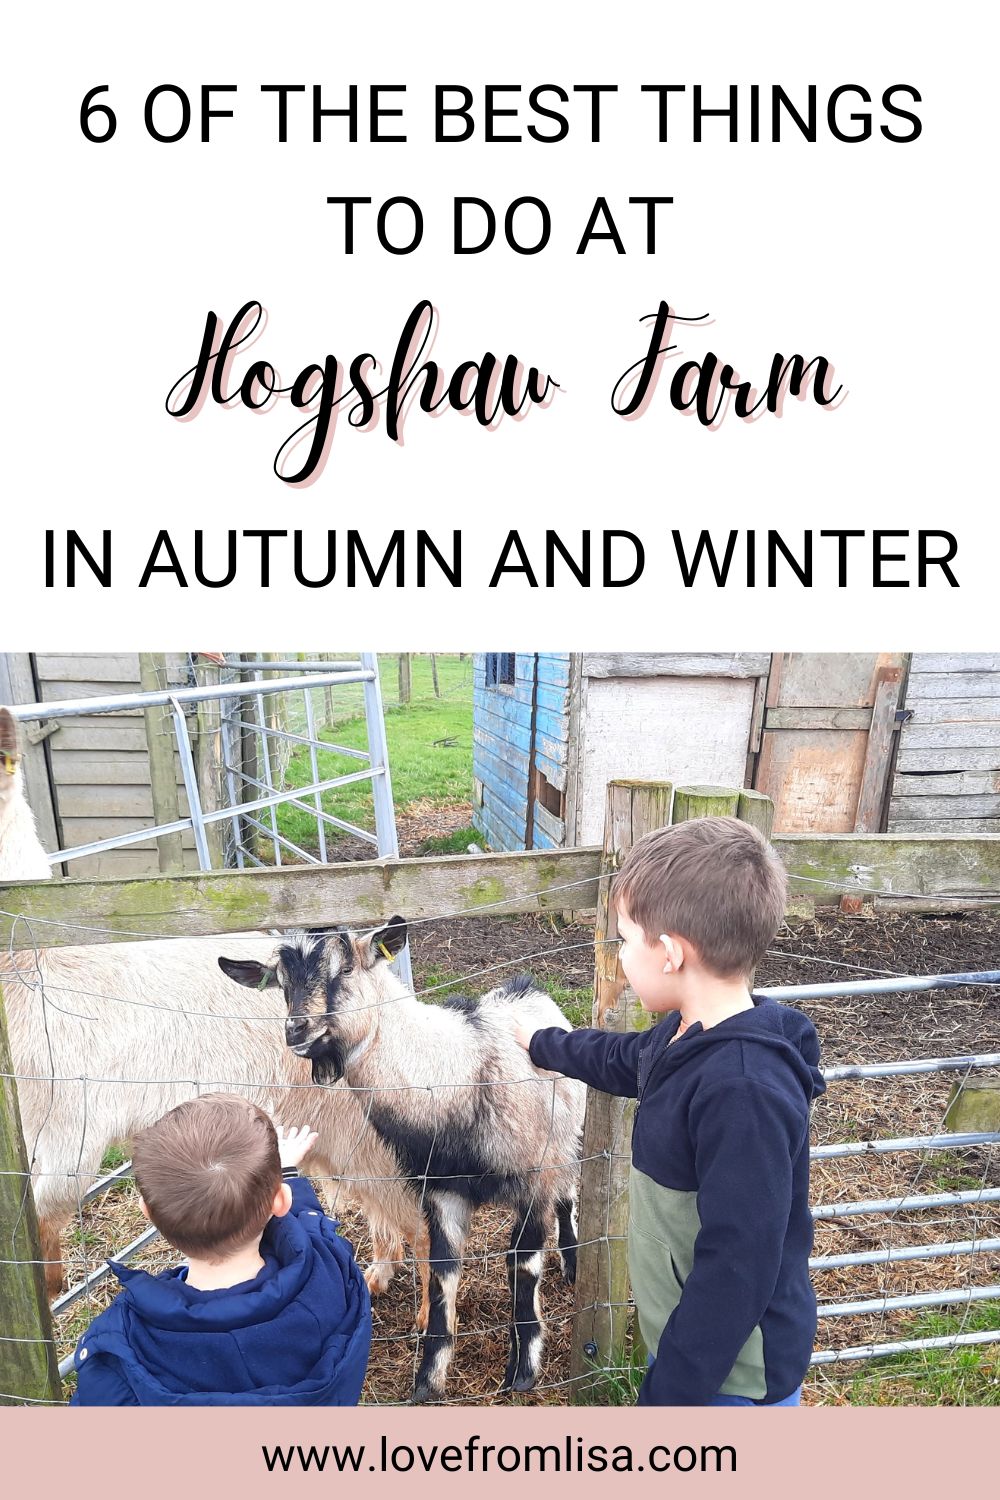 6 of the best things to do at Hogshaw Farm in autumn and winter reindeers